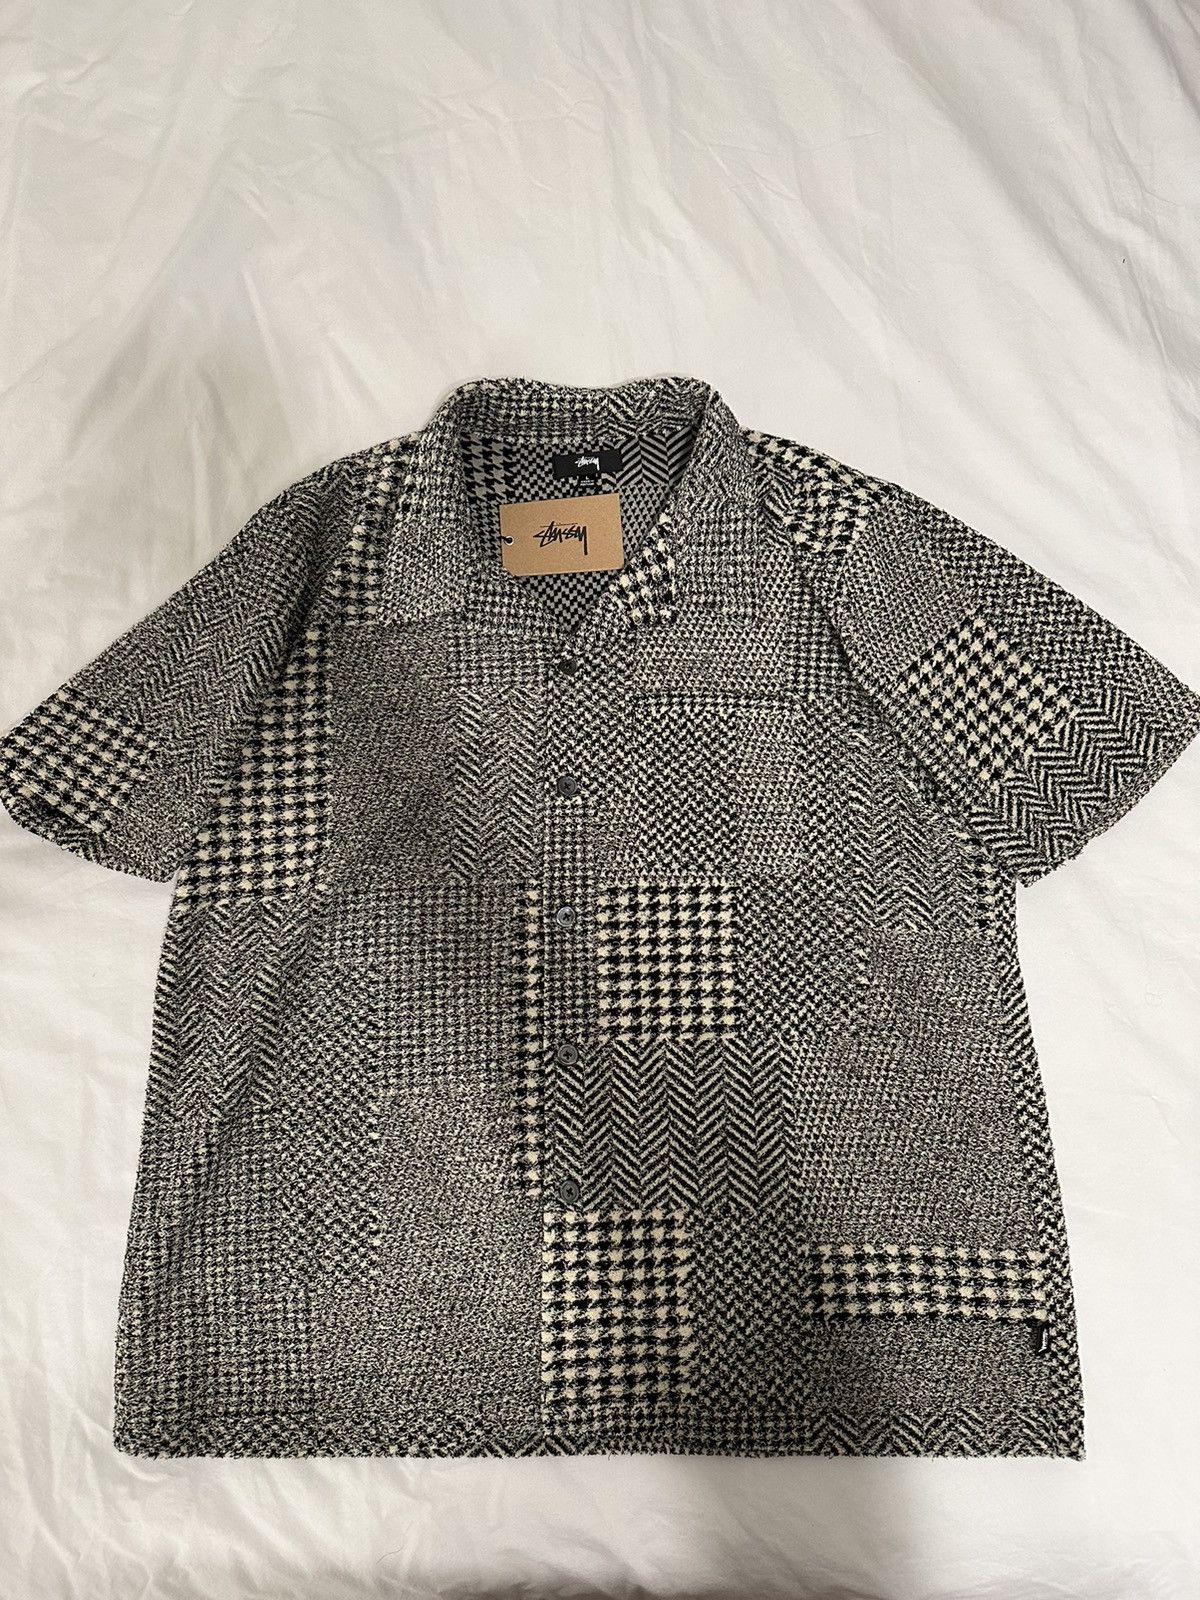 Stussy Stussy Mixed Pattern Jersey Shirt Camp Collar | Grailed